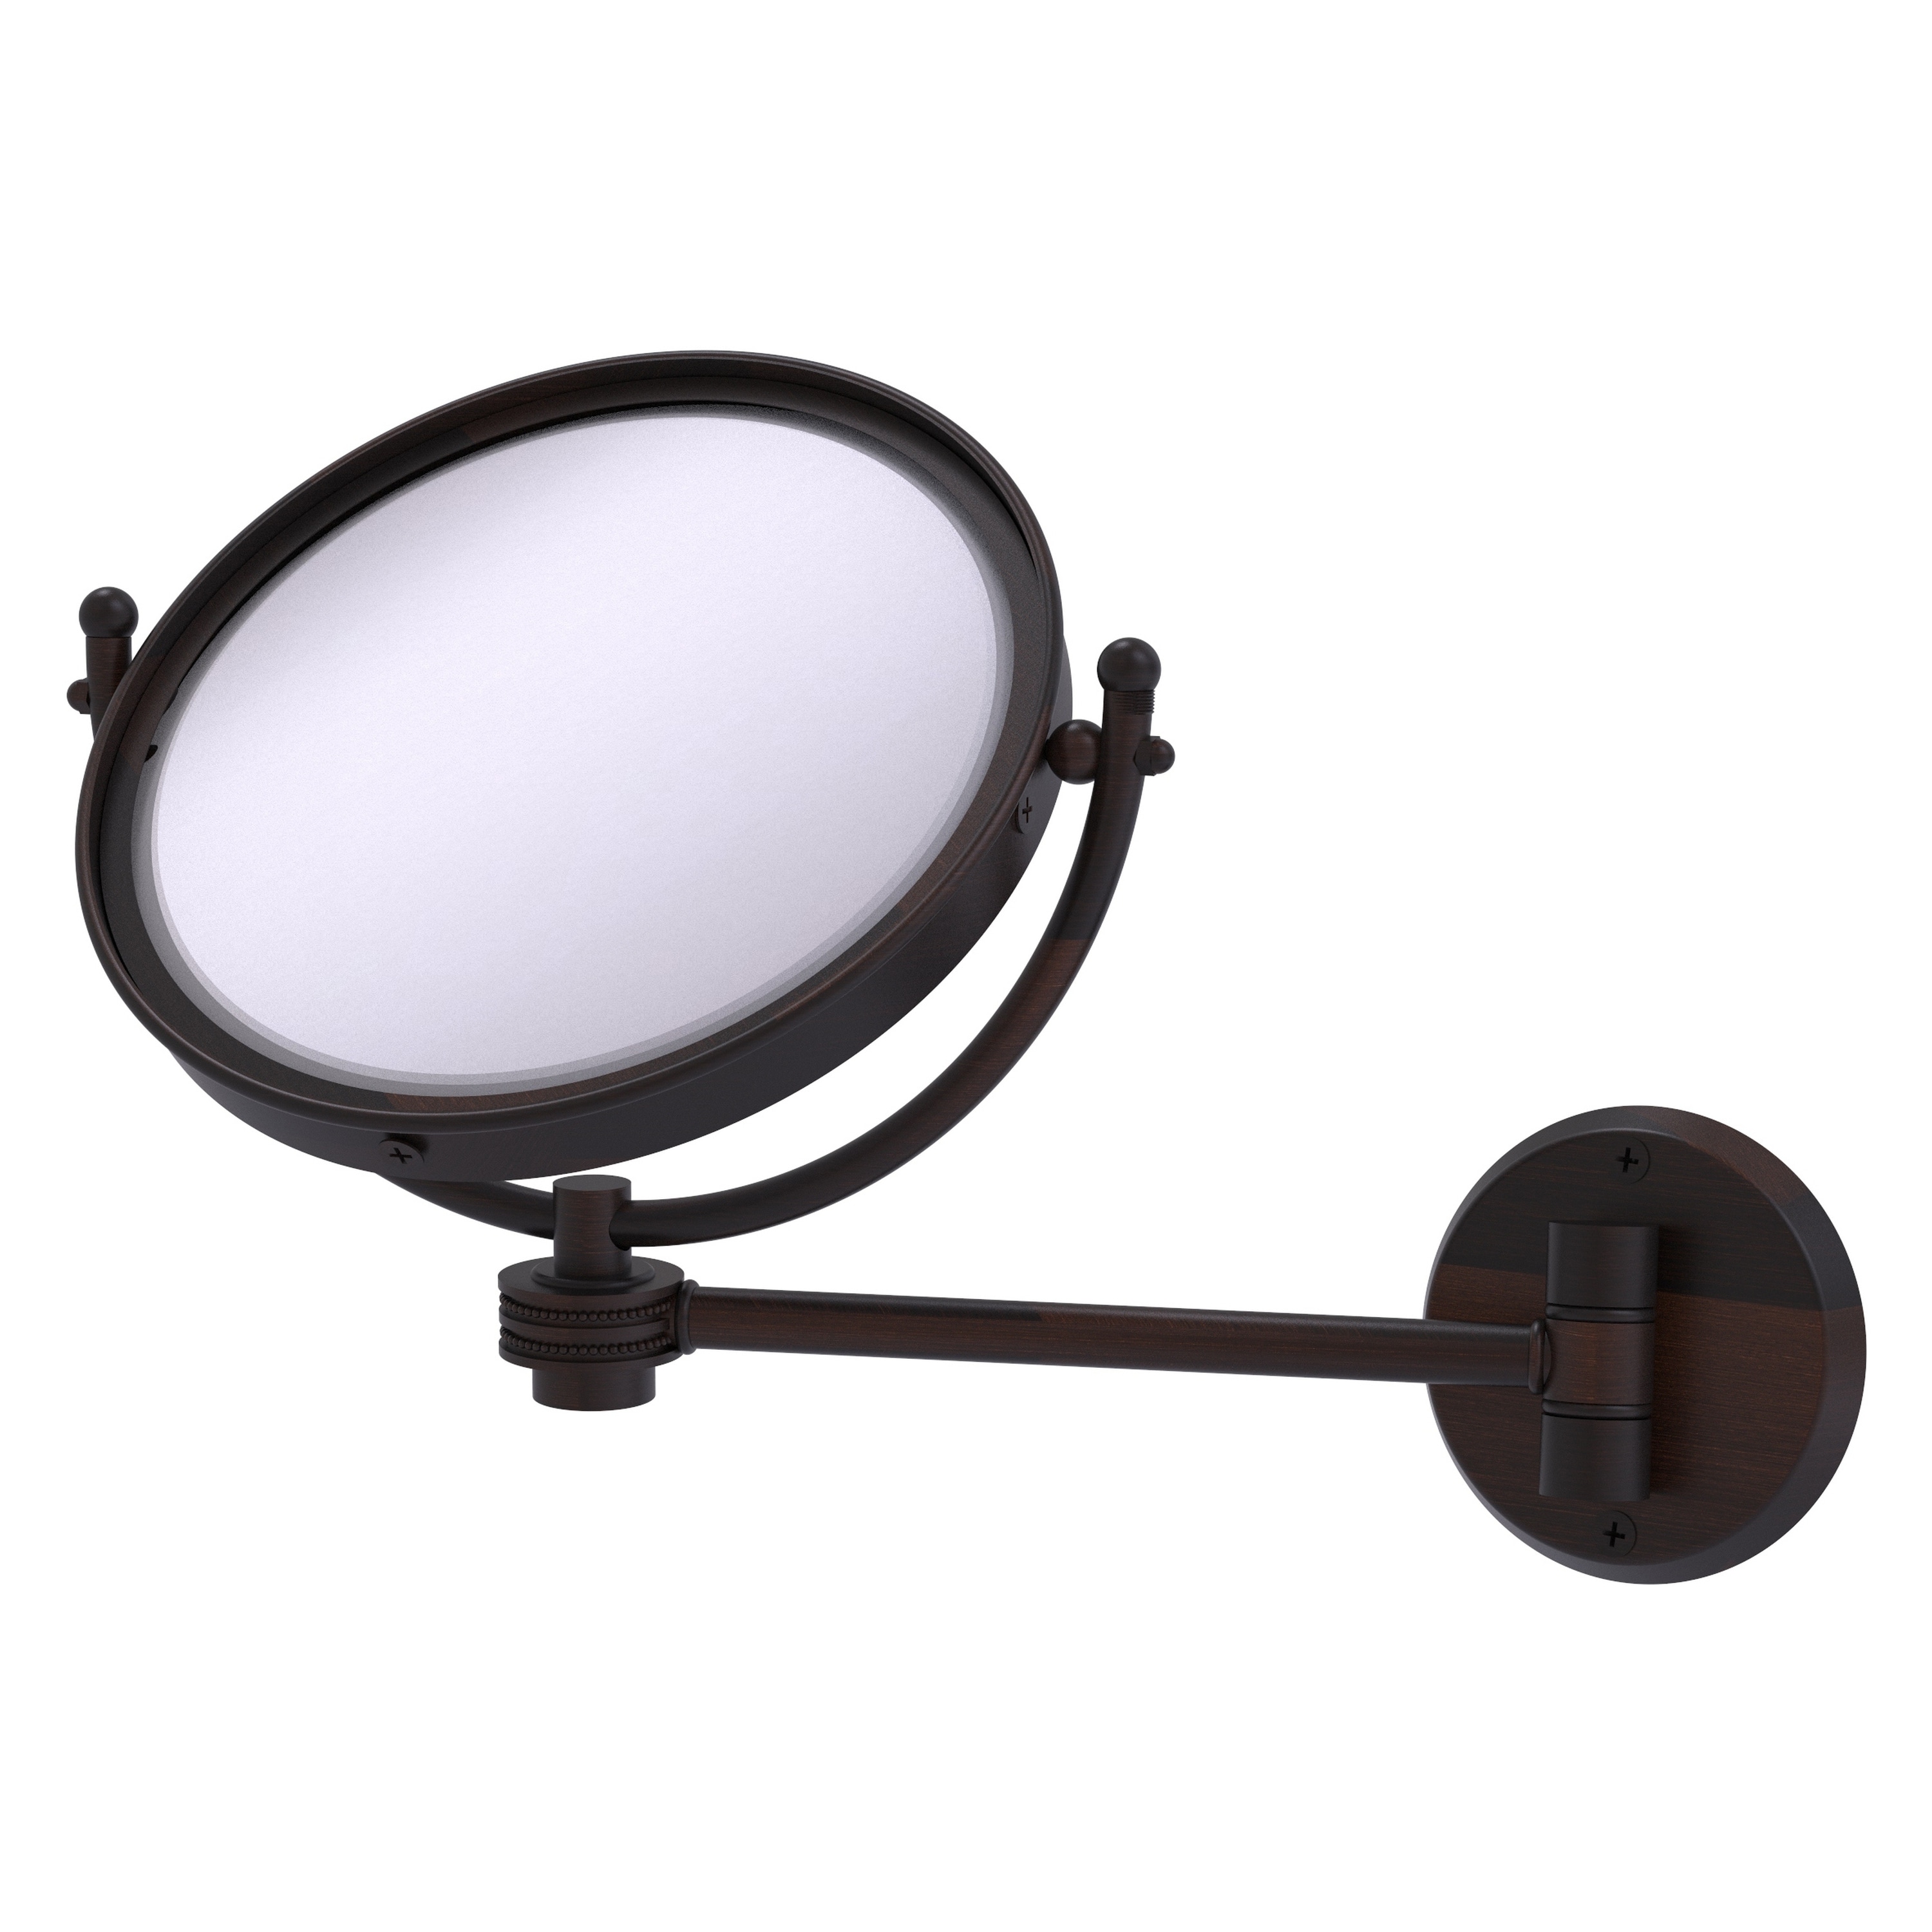 8-in x 10-in Distressed White Double-sided 3X Magnifying Wall-mounted Vanity Mirror | - Allied Brass WM-5D/3X-VB